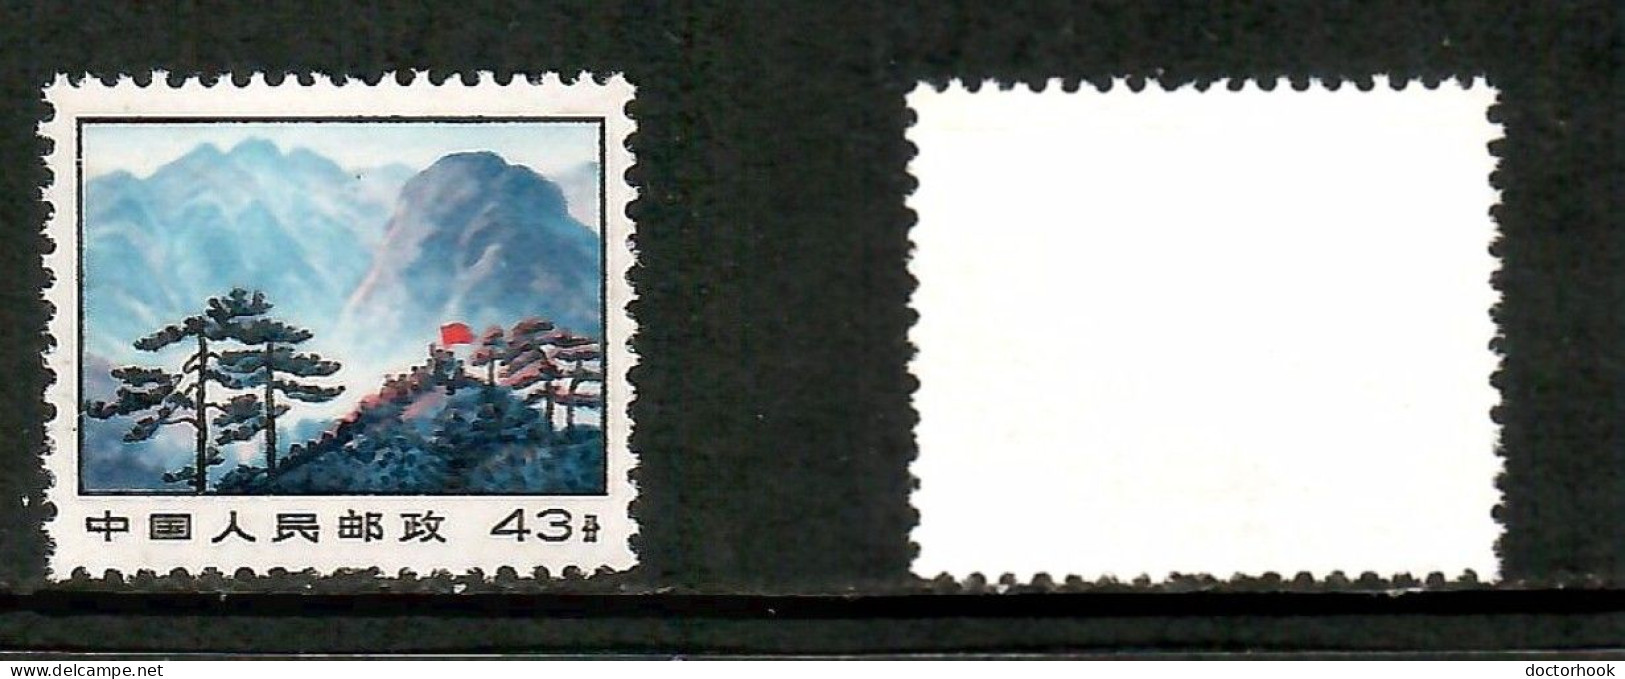 PEOPLES REPUBLIC Of CHINA   Scott # 1034* MINT NO GUM AS ISSUED (CONDITION AS PER SCAN) (Stamp Scan # 1012-10) - Neufs